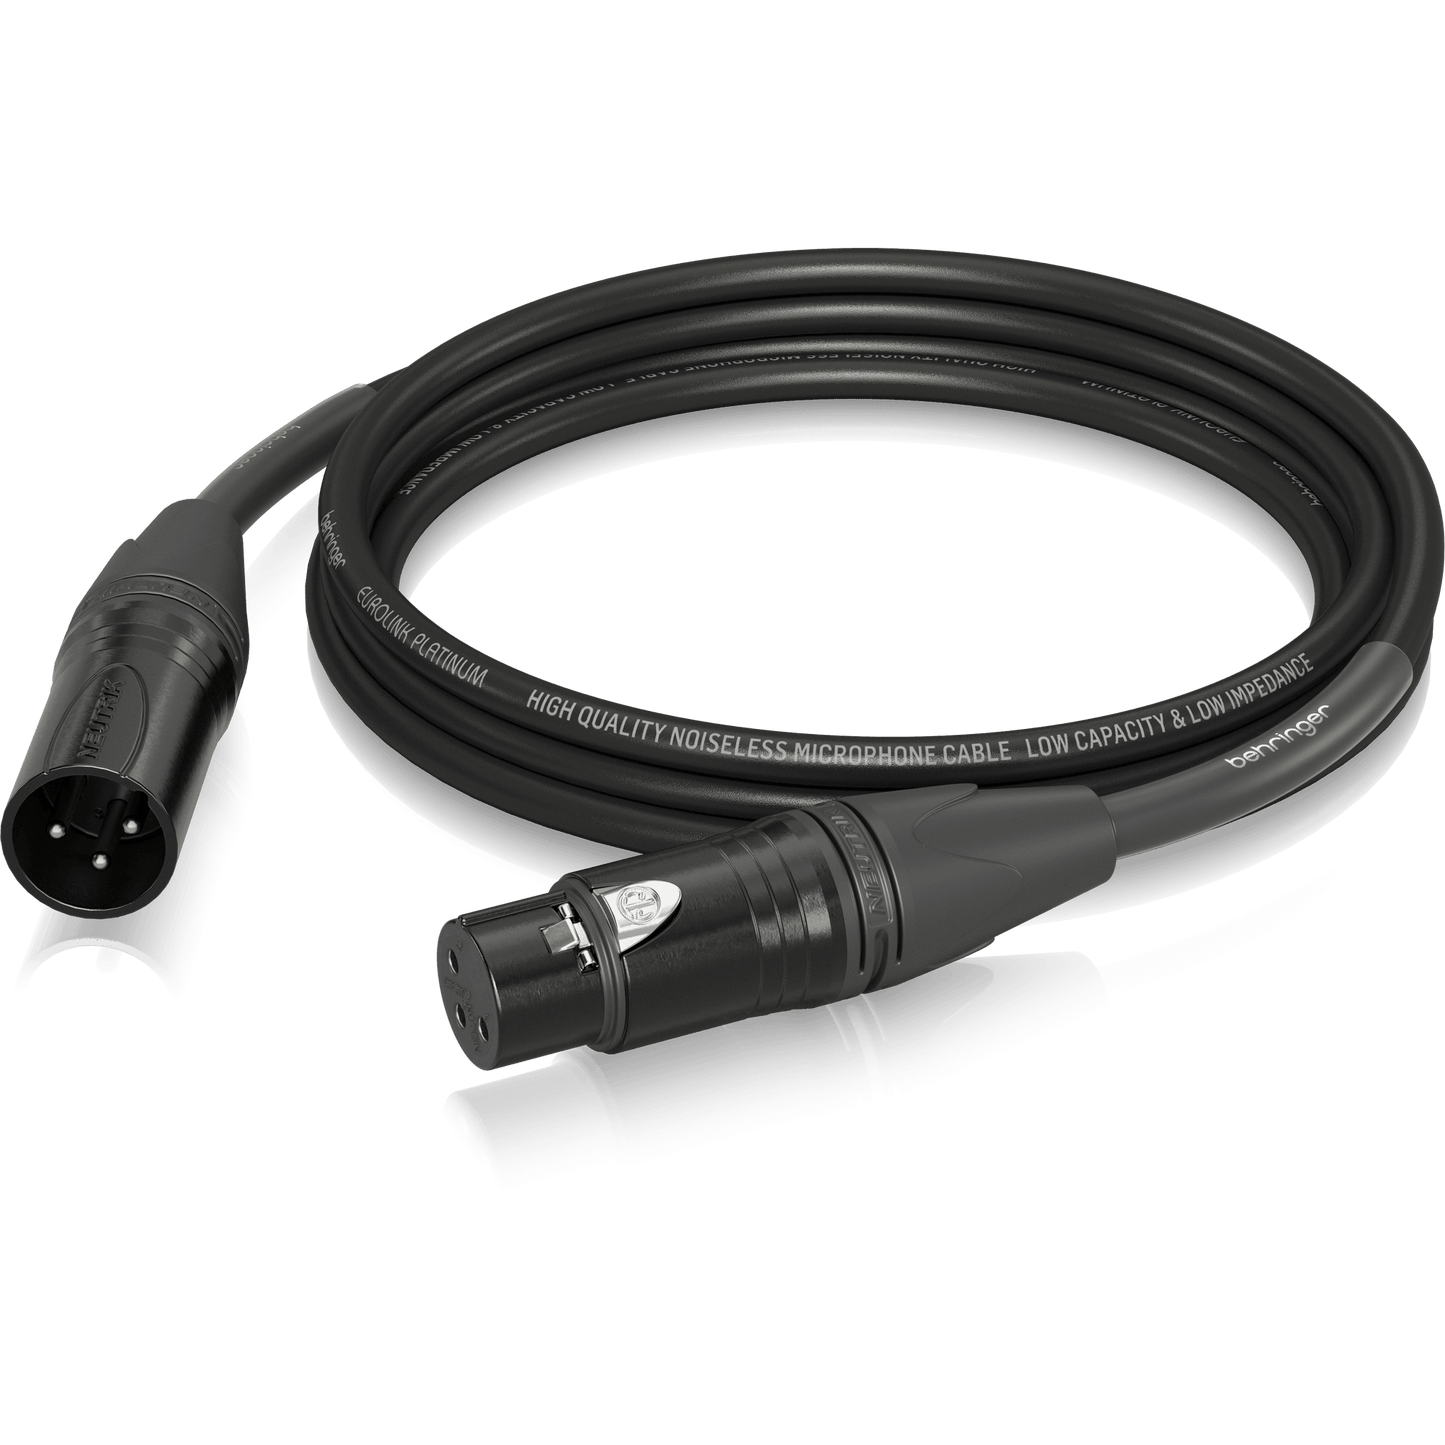 Behringer PMC300 Microphone Cable 3 m (10 ft) with XLR Connectors